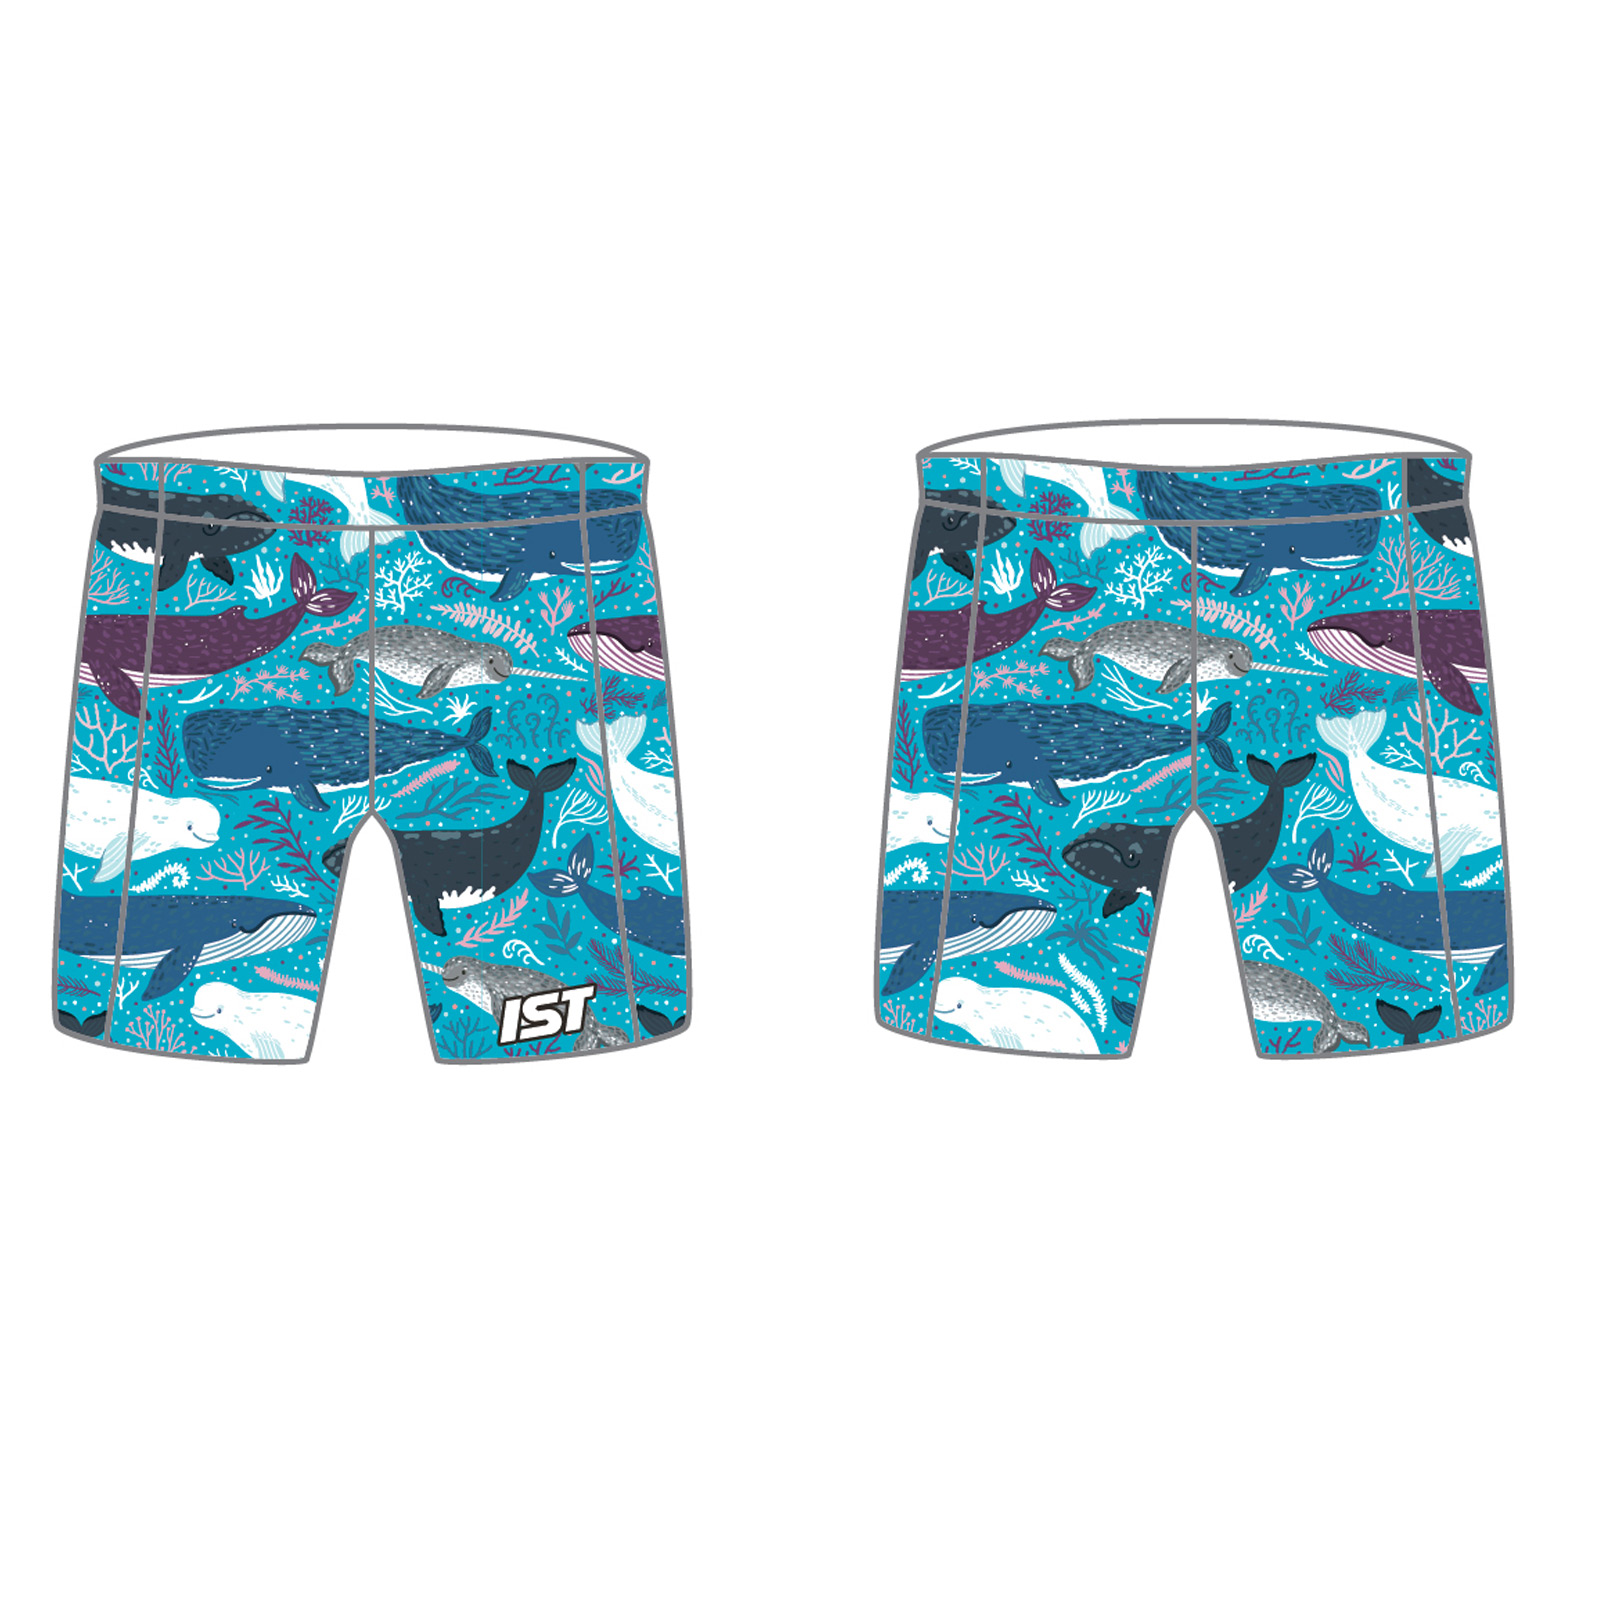 IST Diving System :: RECREATIONAL :: KIDS GEAR :: Kid's Spandex Shorts